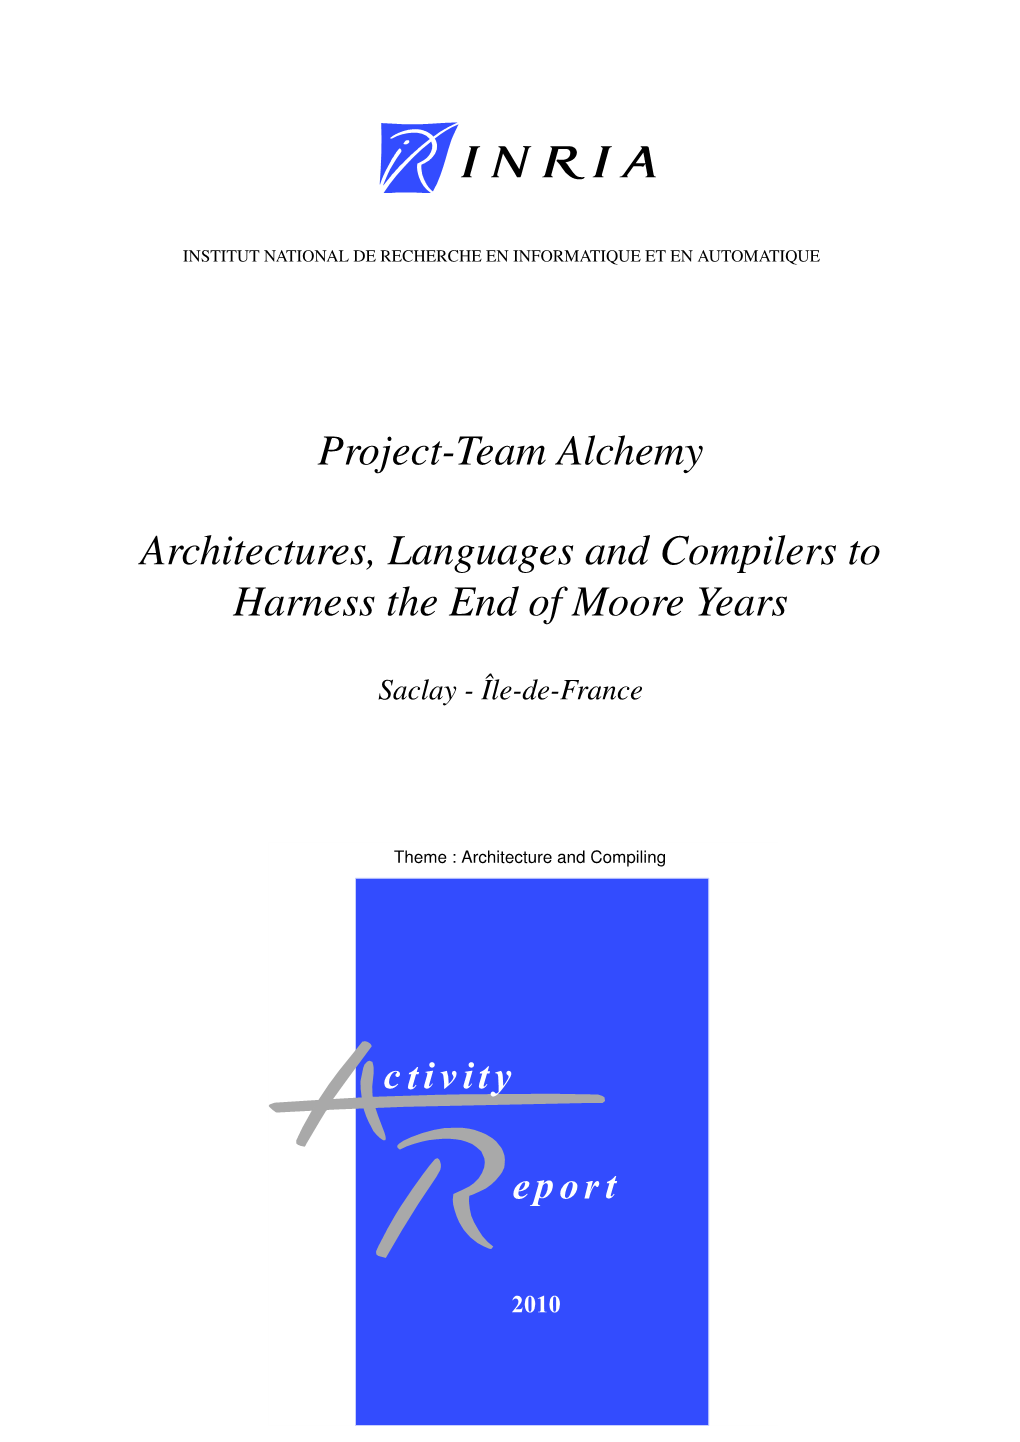 Project-Team Alchemy Architectures, Languages and Compilers To